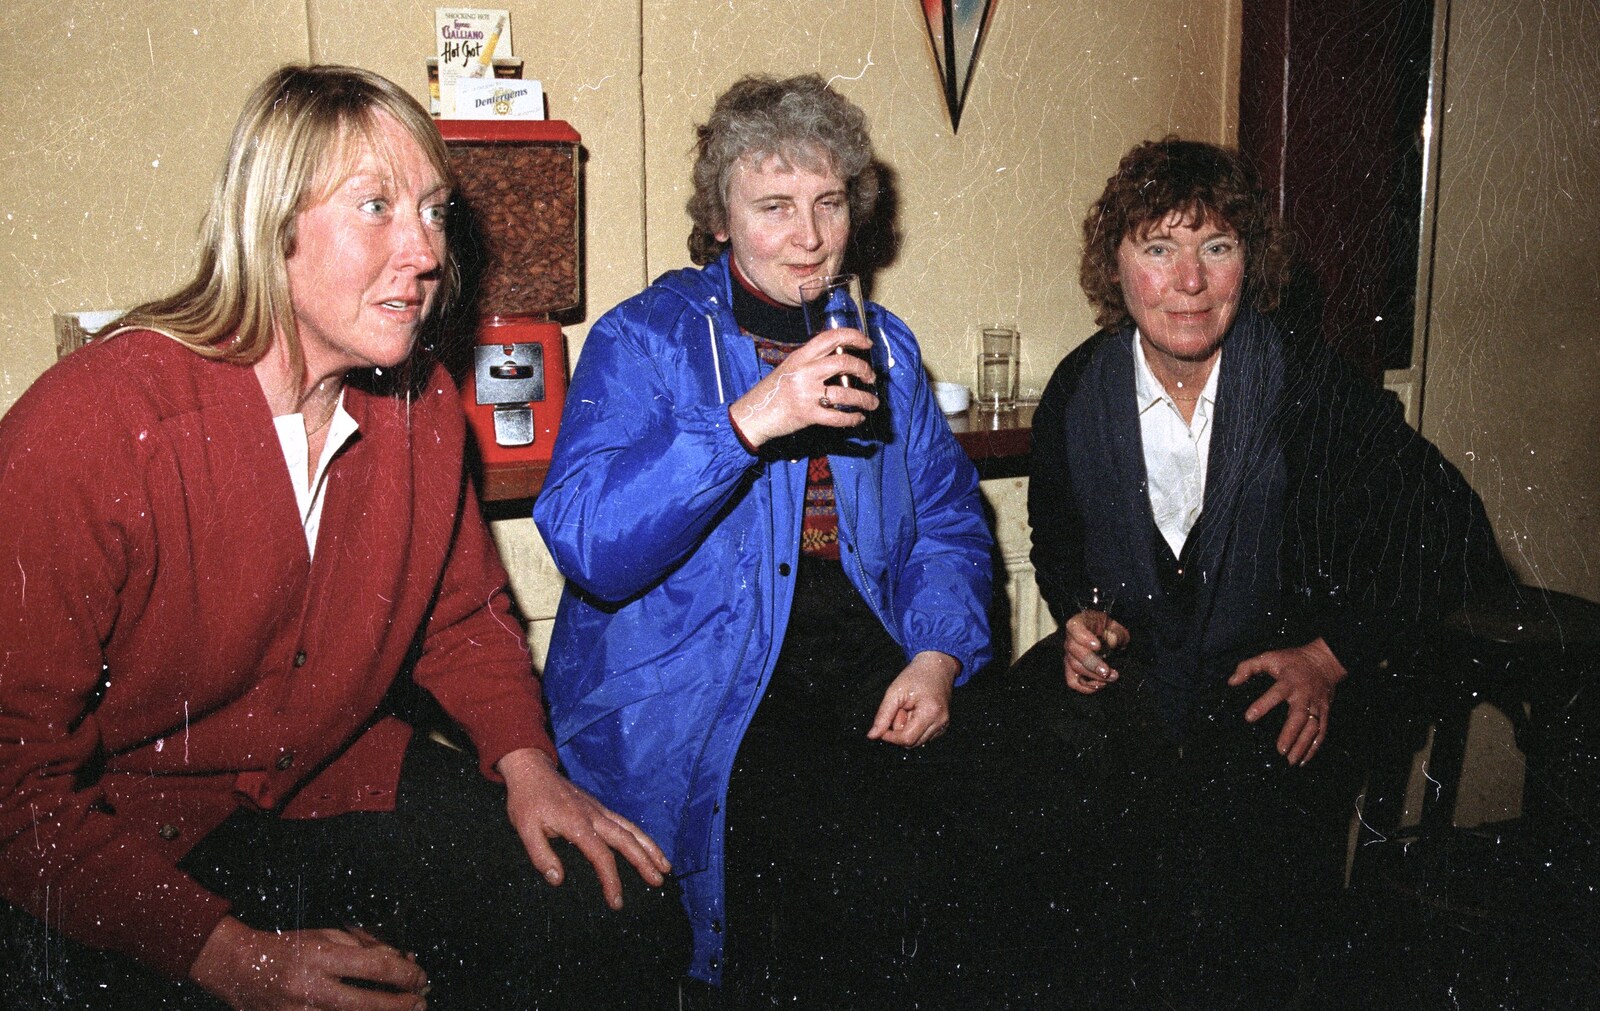 Out and About in Amsterdam, Hoorne, Vollendam and Edam, The Netherlands - 26th March 1992: Sue looks freaked out in a bar